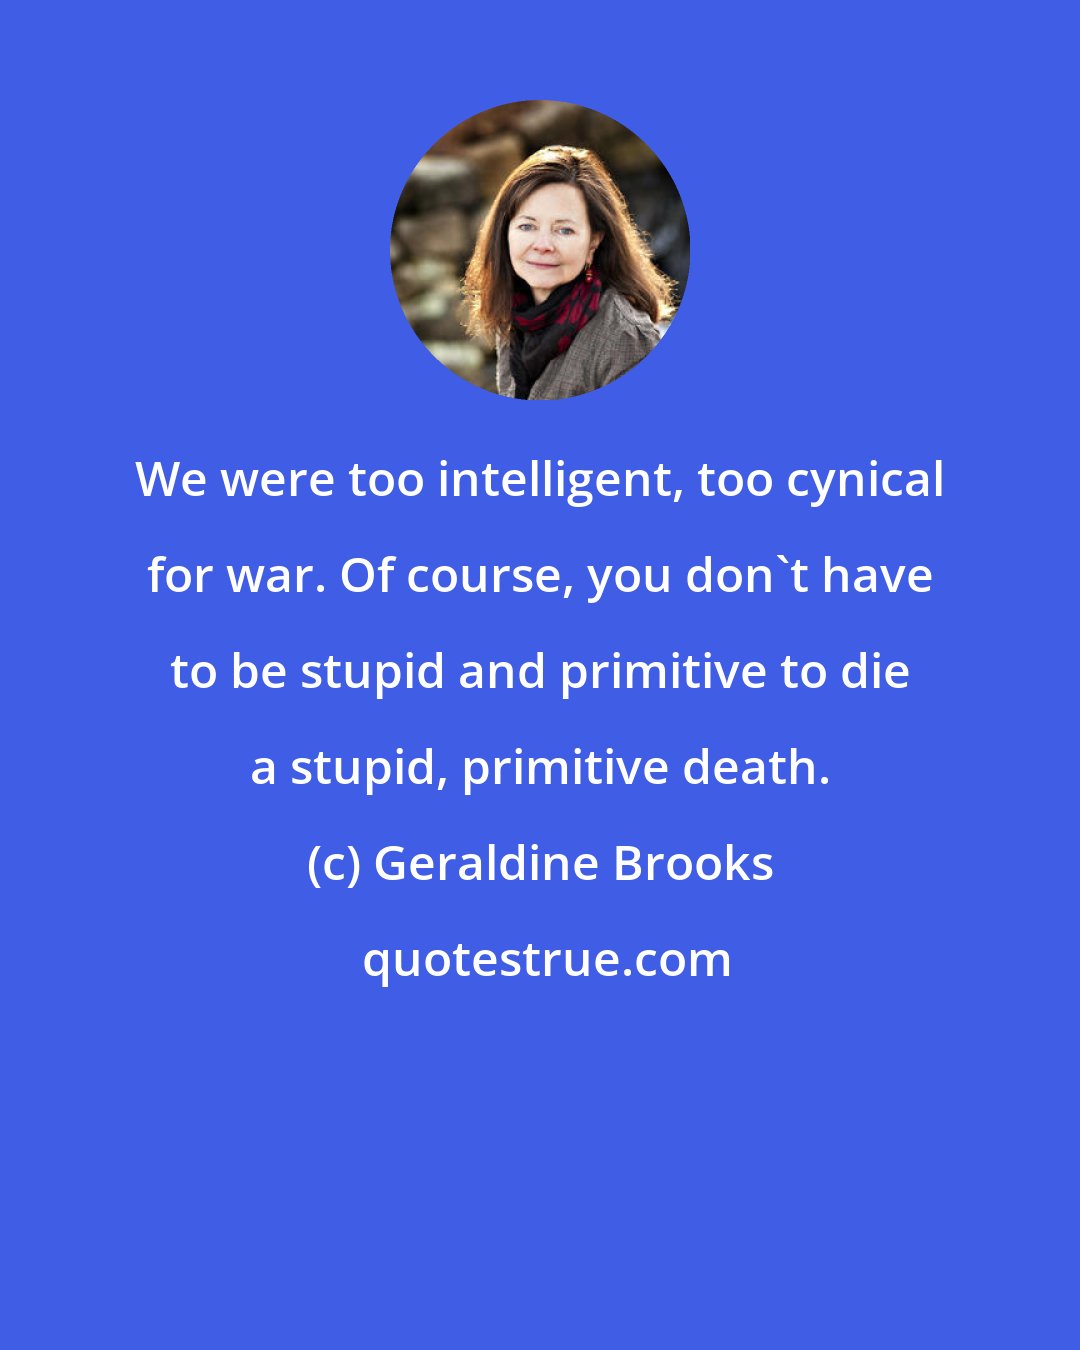 Geraldine Brooks: We were too intelligent, too cynical for war. Of course, you don't have to be stupid and primitive to die a stupid, primitive death.